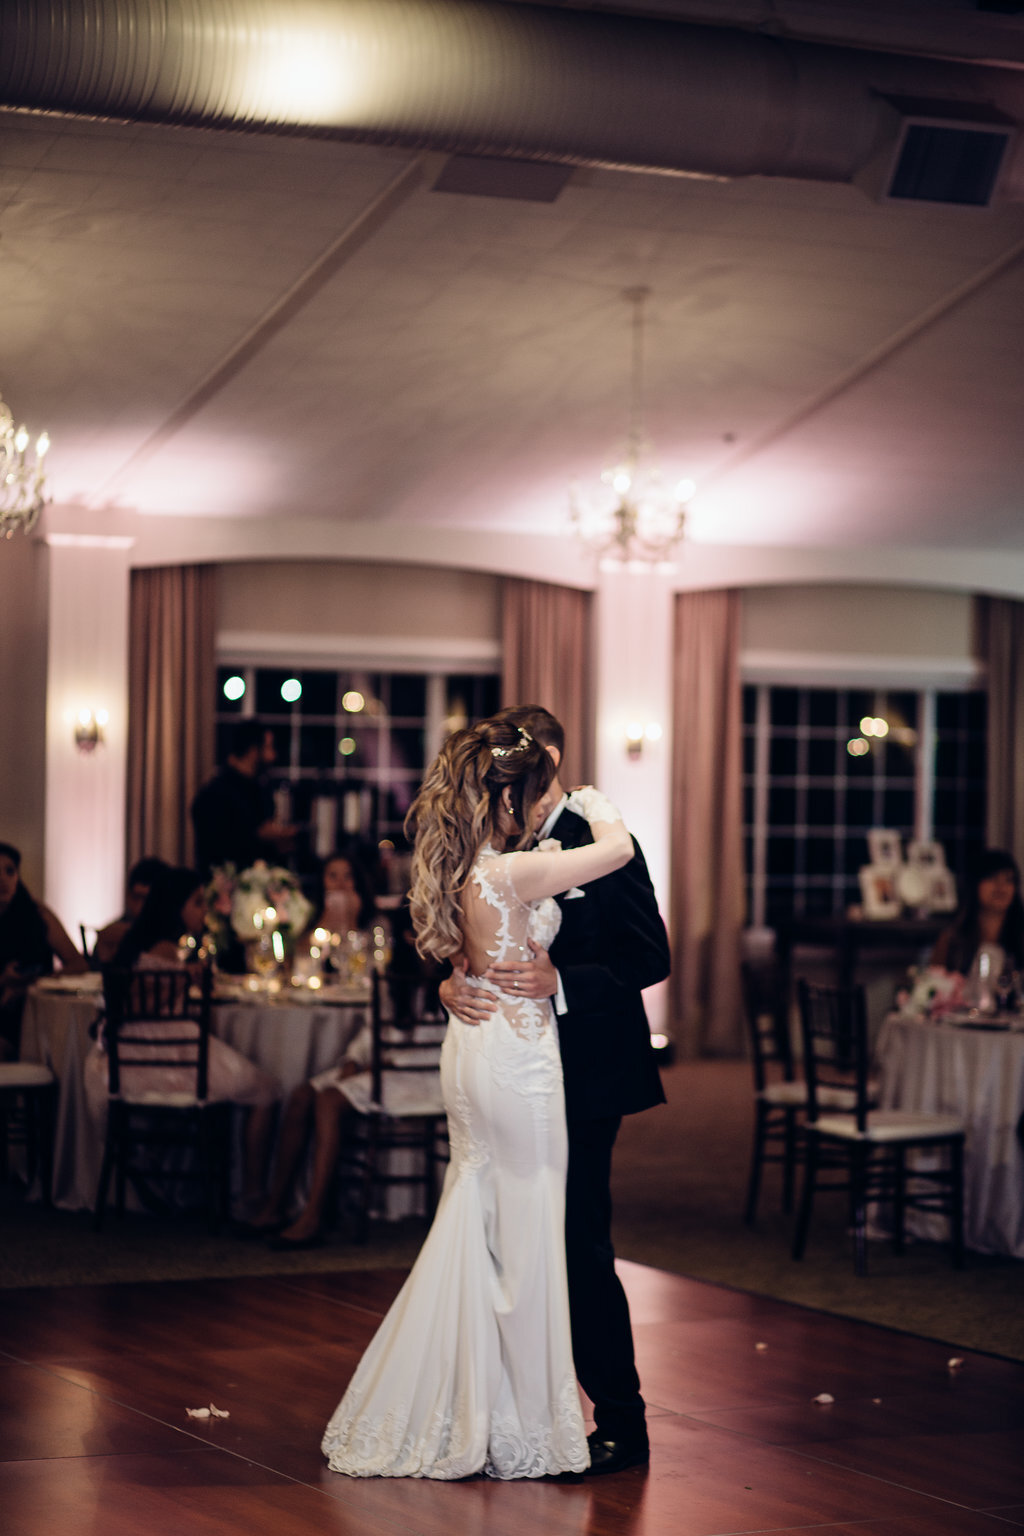 Wedding Photograph Of Bride And Groom Holding Each Other While Dancing Los Angeles